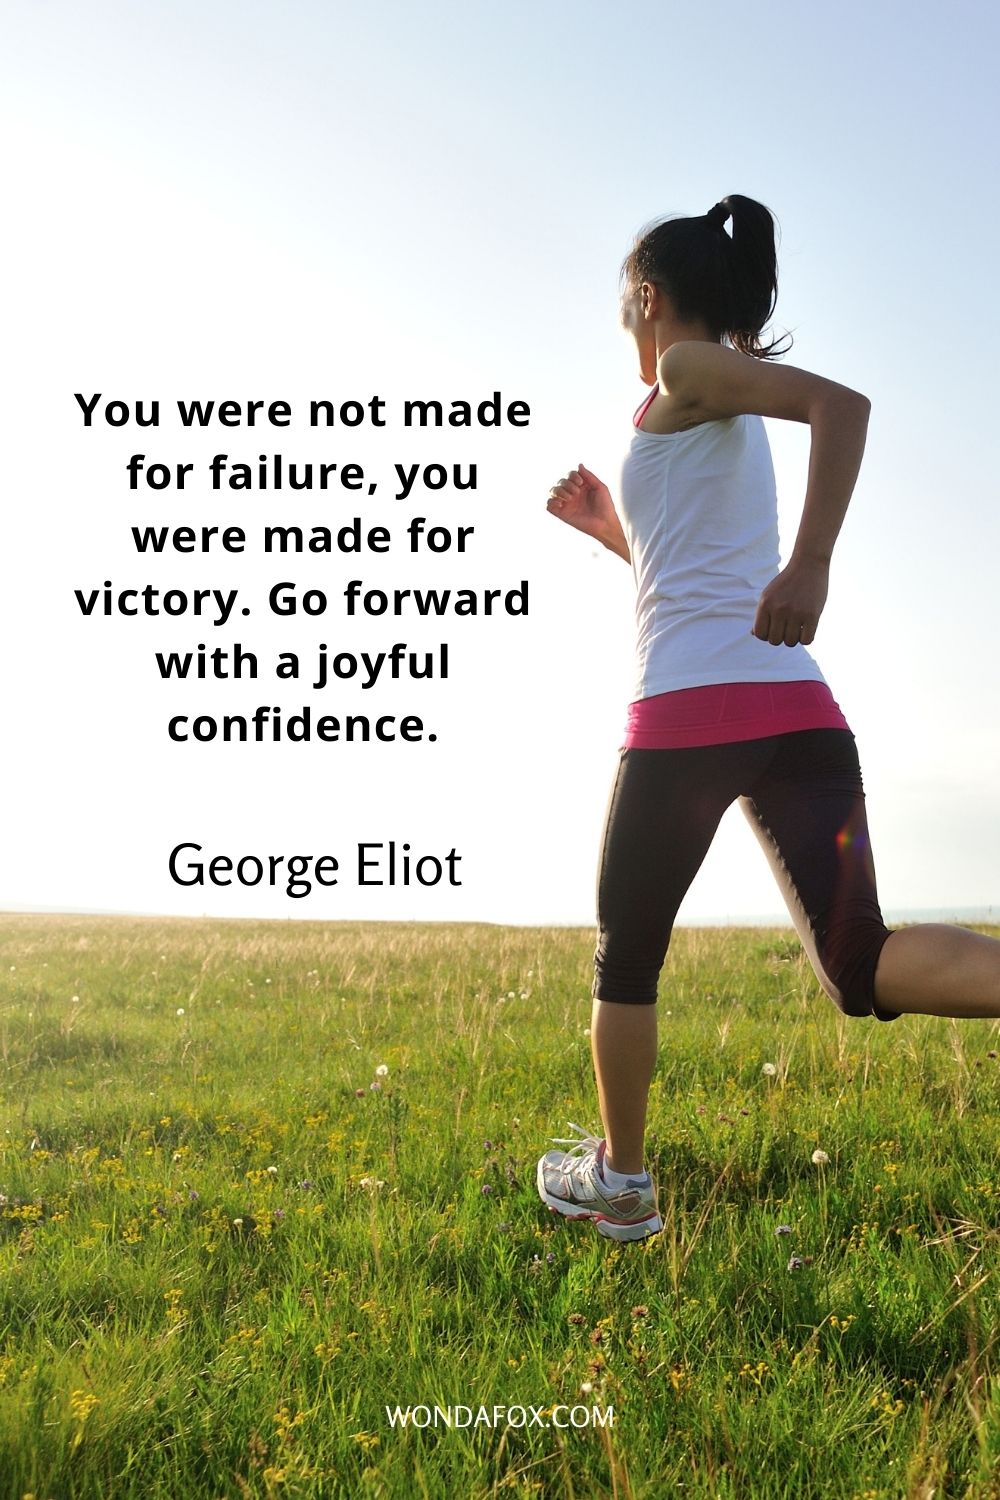 You were not made for failure, you were made for victory. Go forward with a joyful confidence.